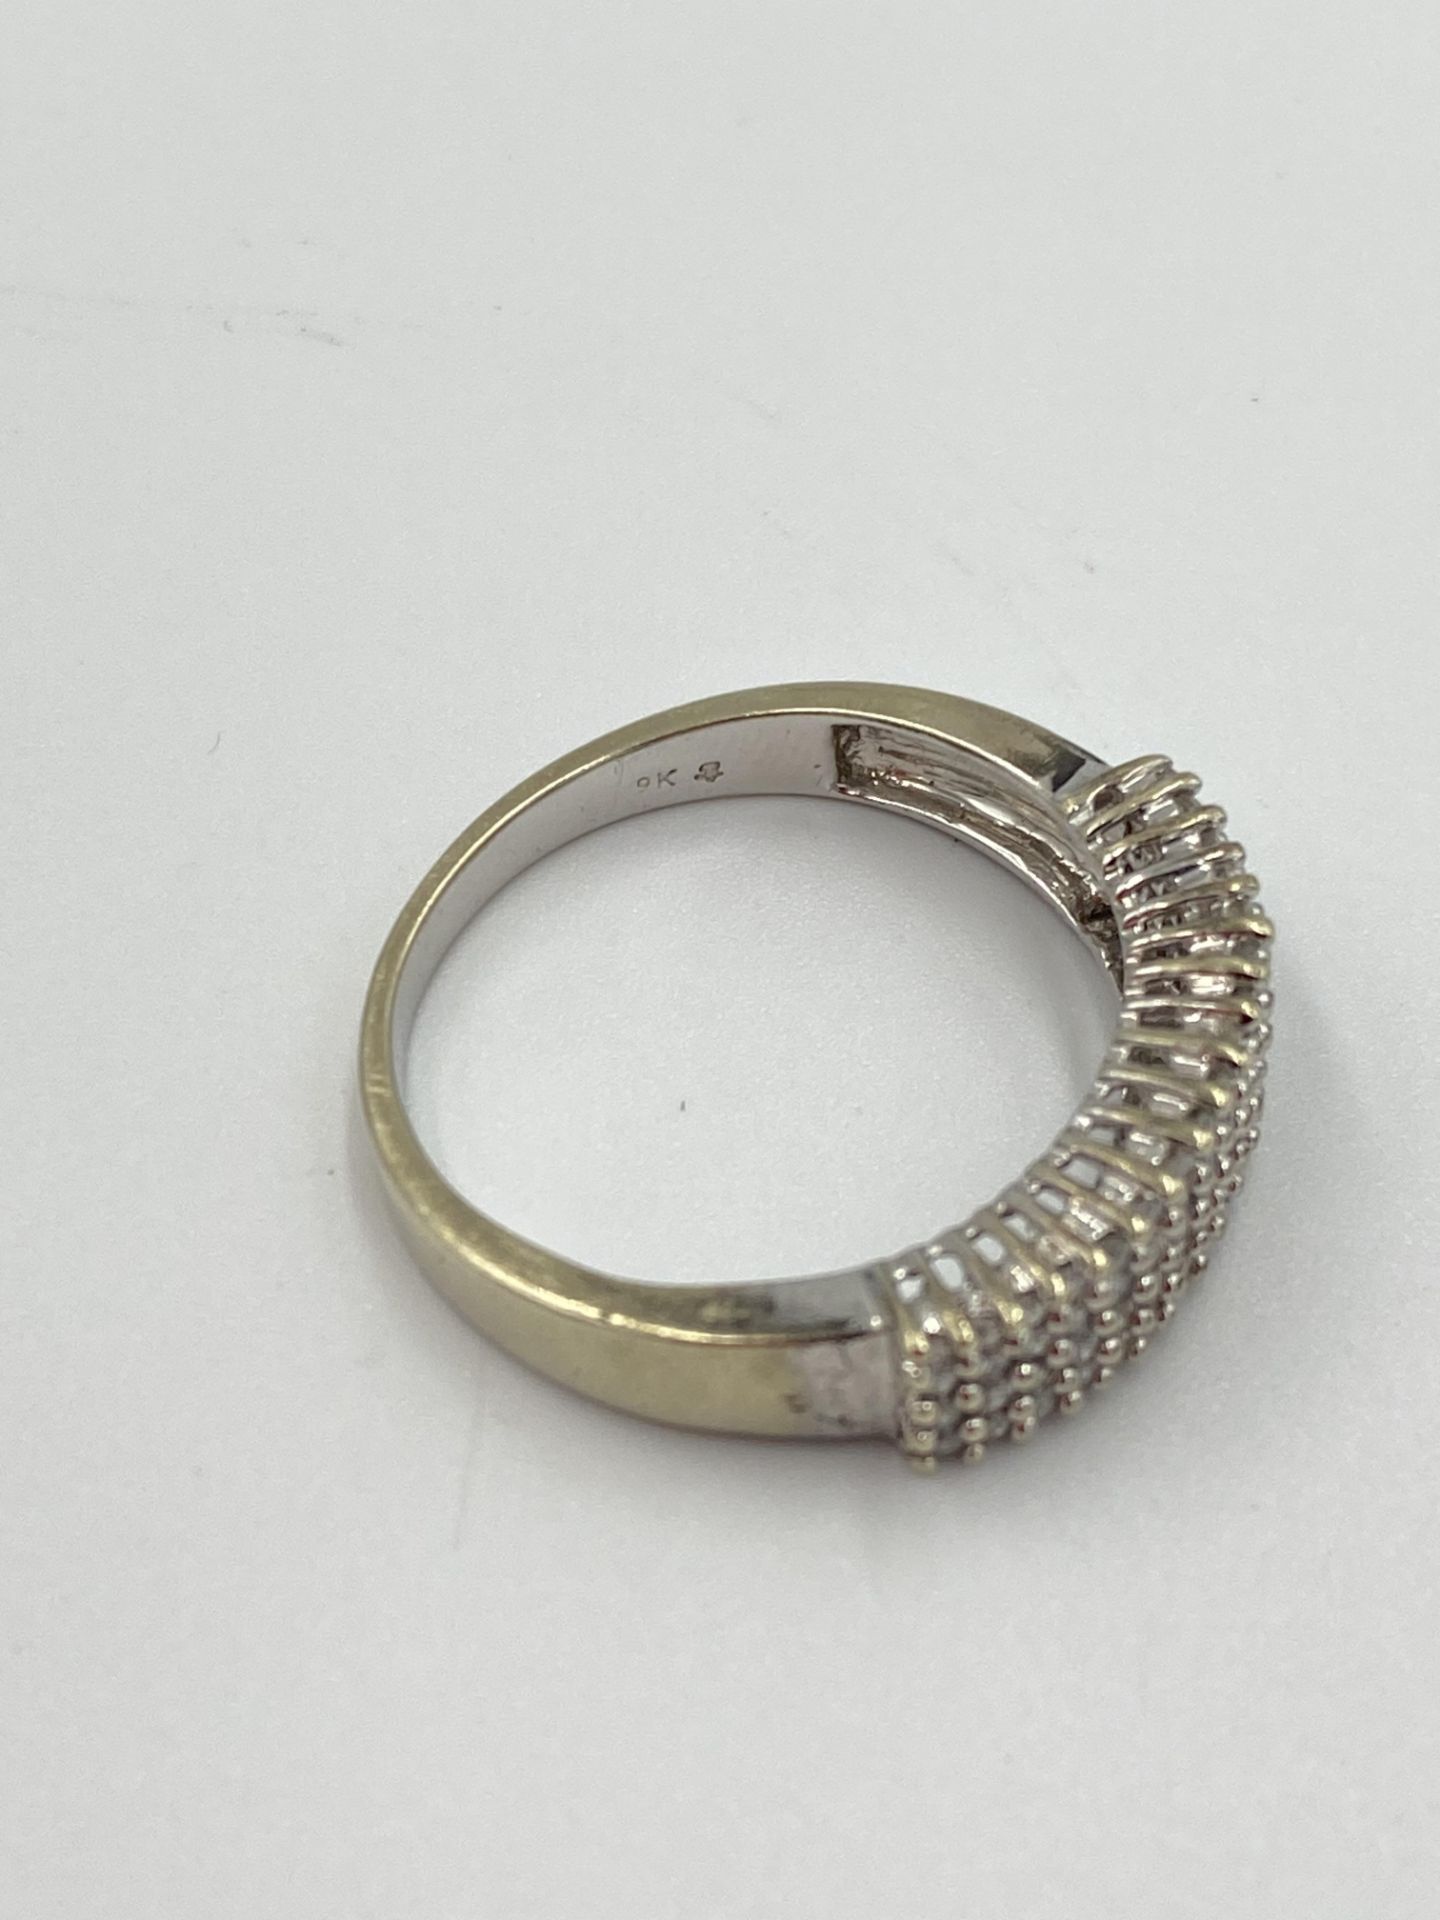 9ct white gold and diamond ring - Image 4 of 6